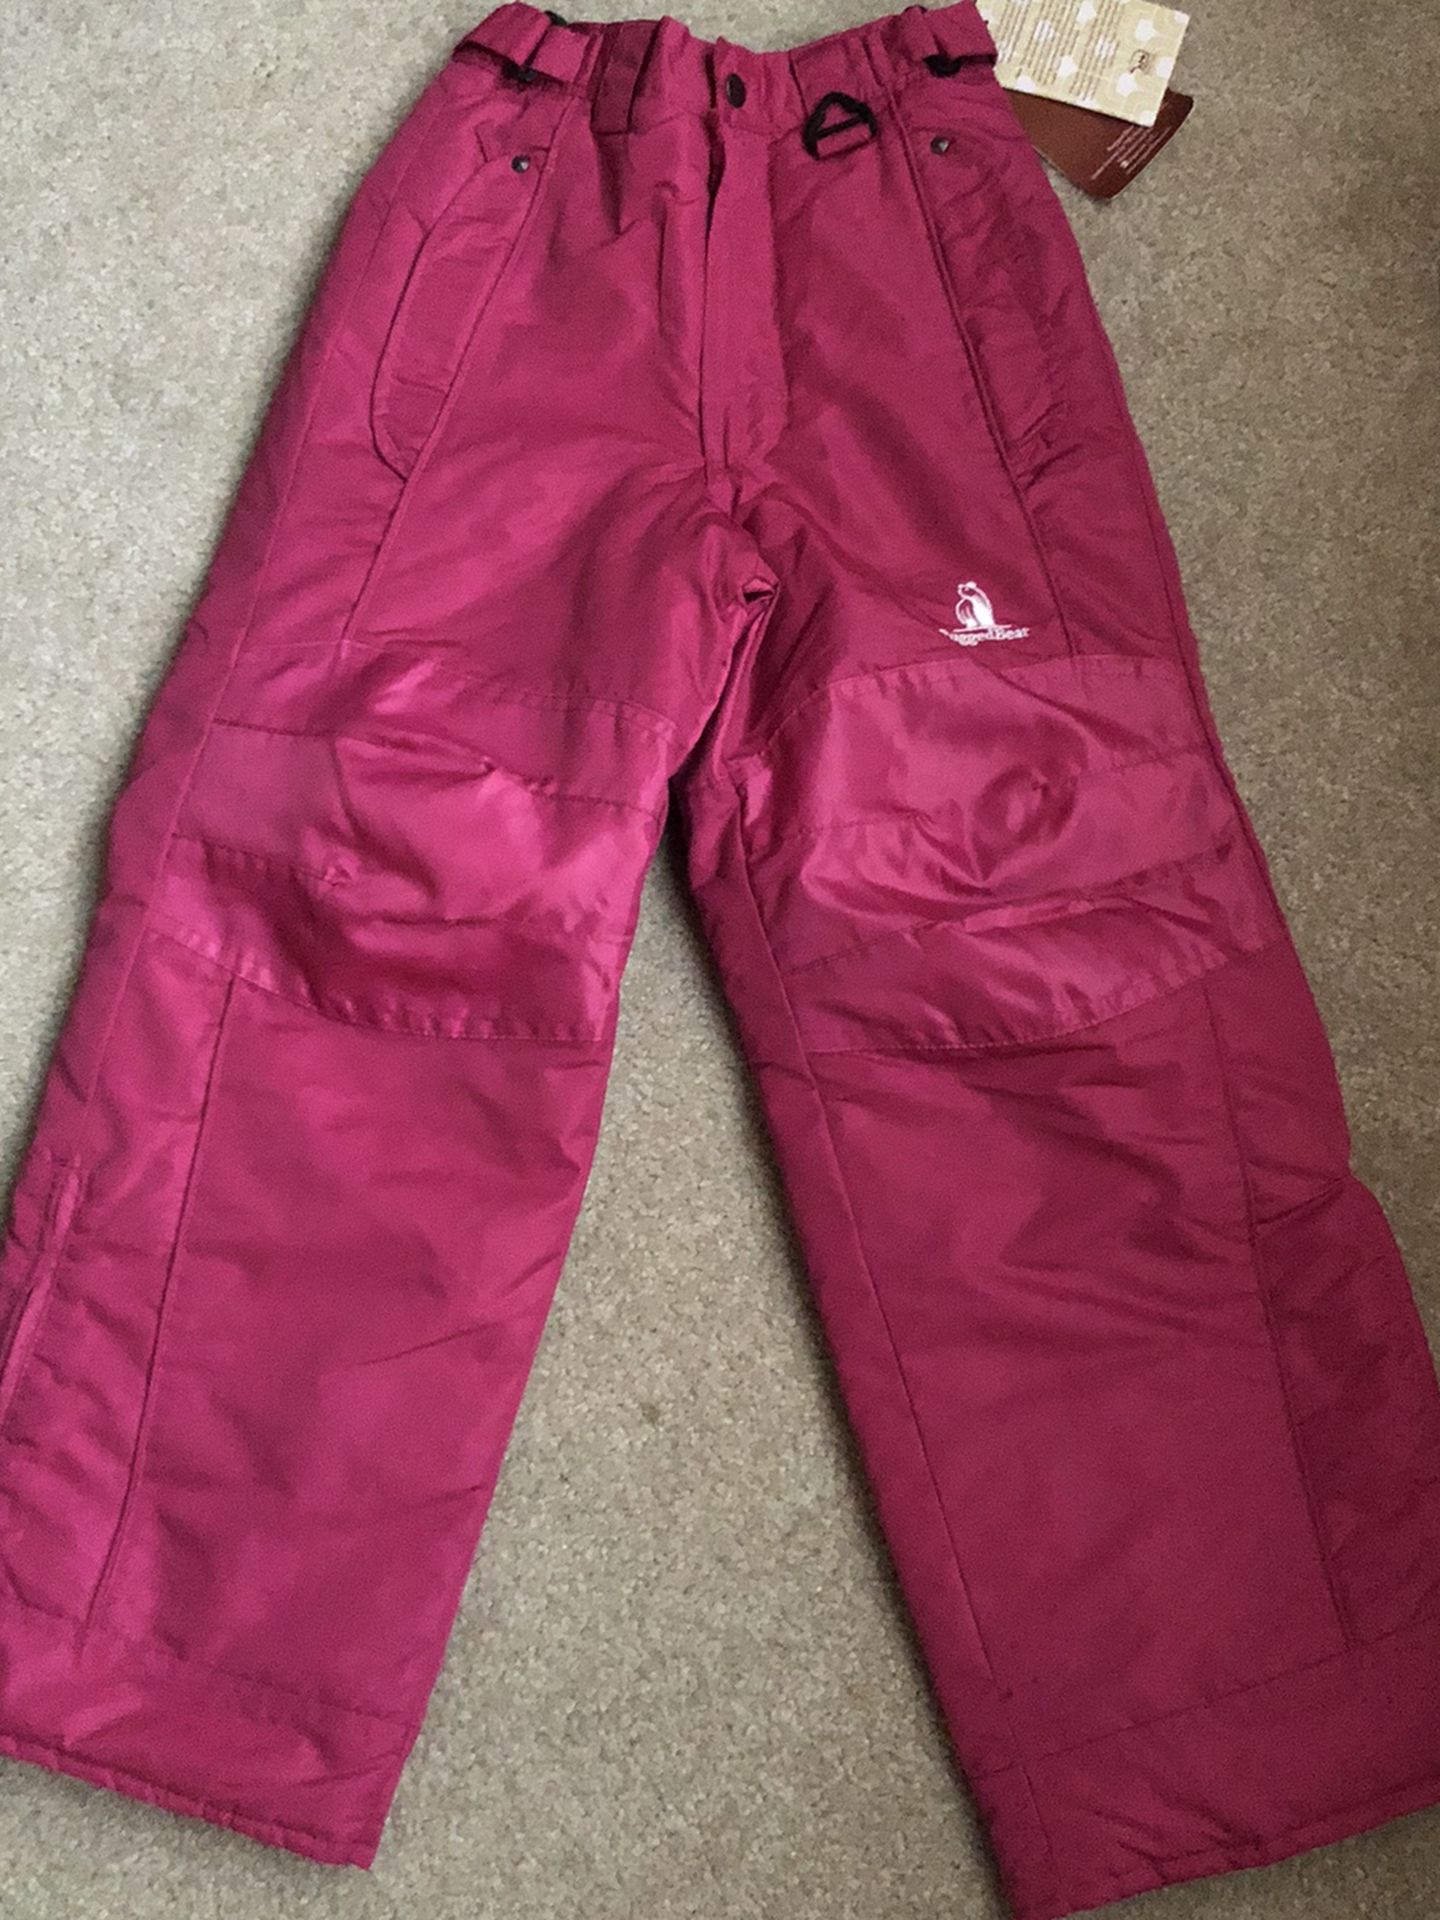 New Snow Pants Girls 7-8 Pink Rugged Bear New With Tags